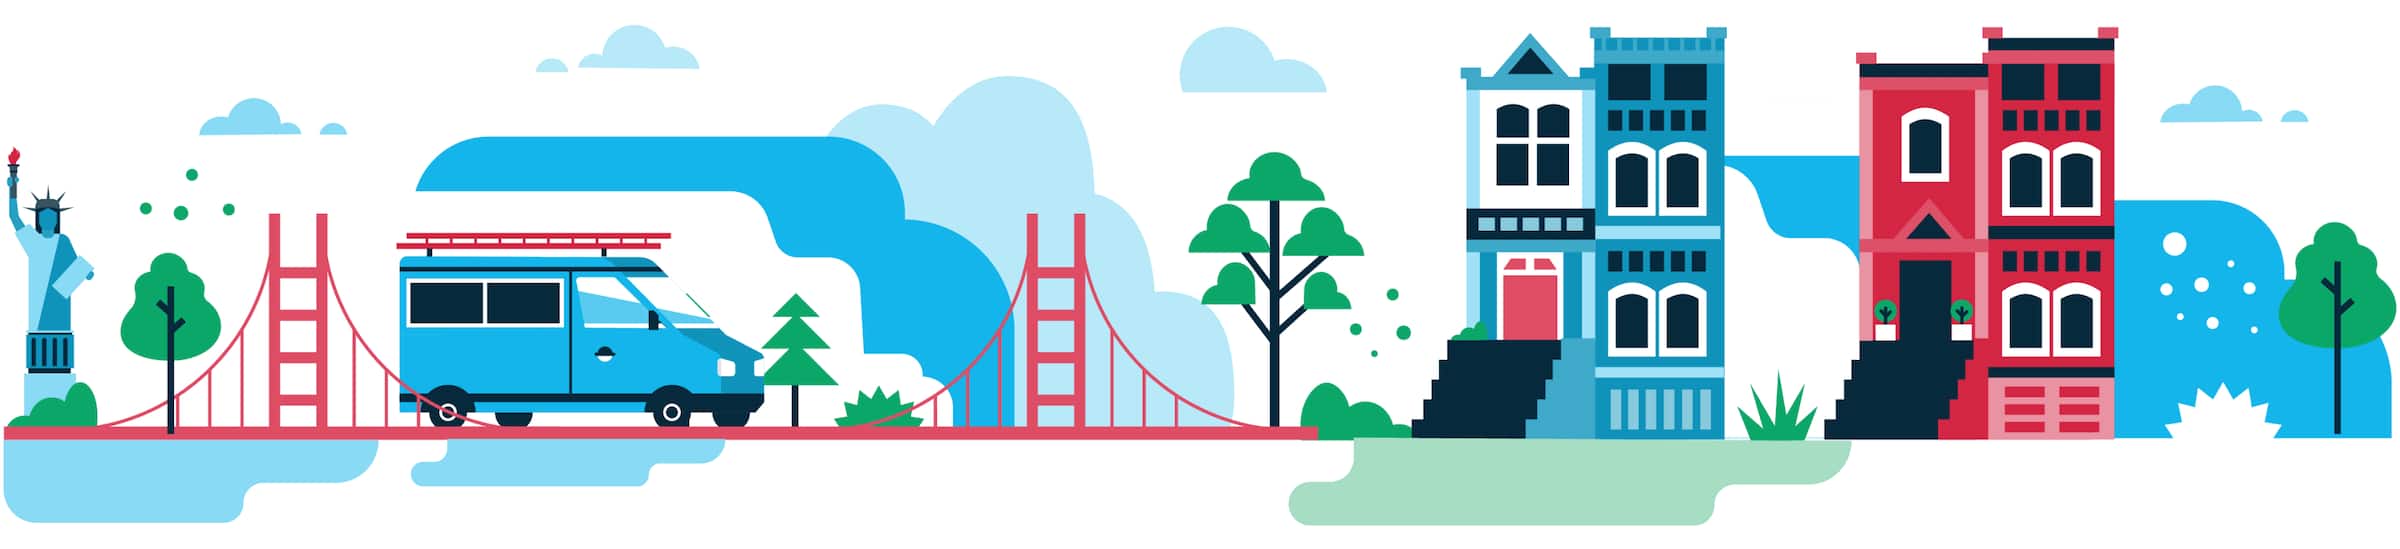 A header image for Xero’s San Francisco office, in the USA, shows some of the city’s best-known landmarks and attractions.